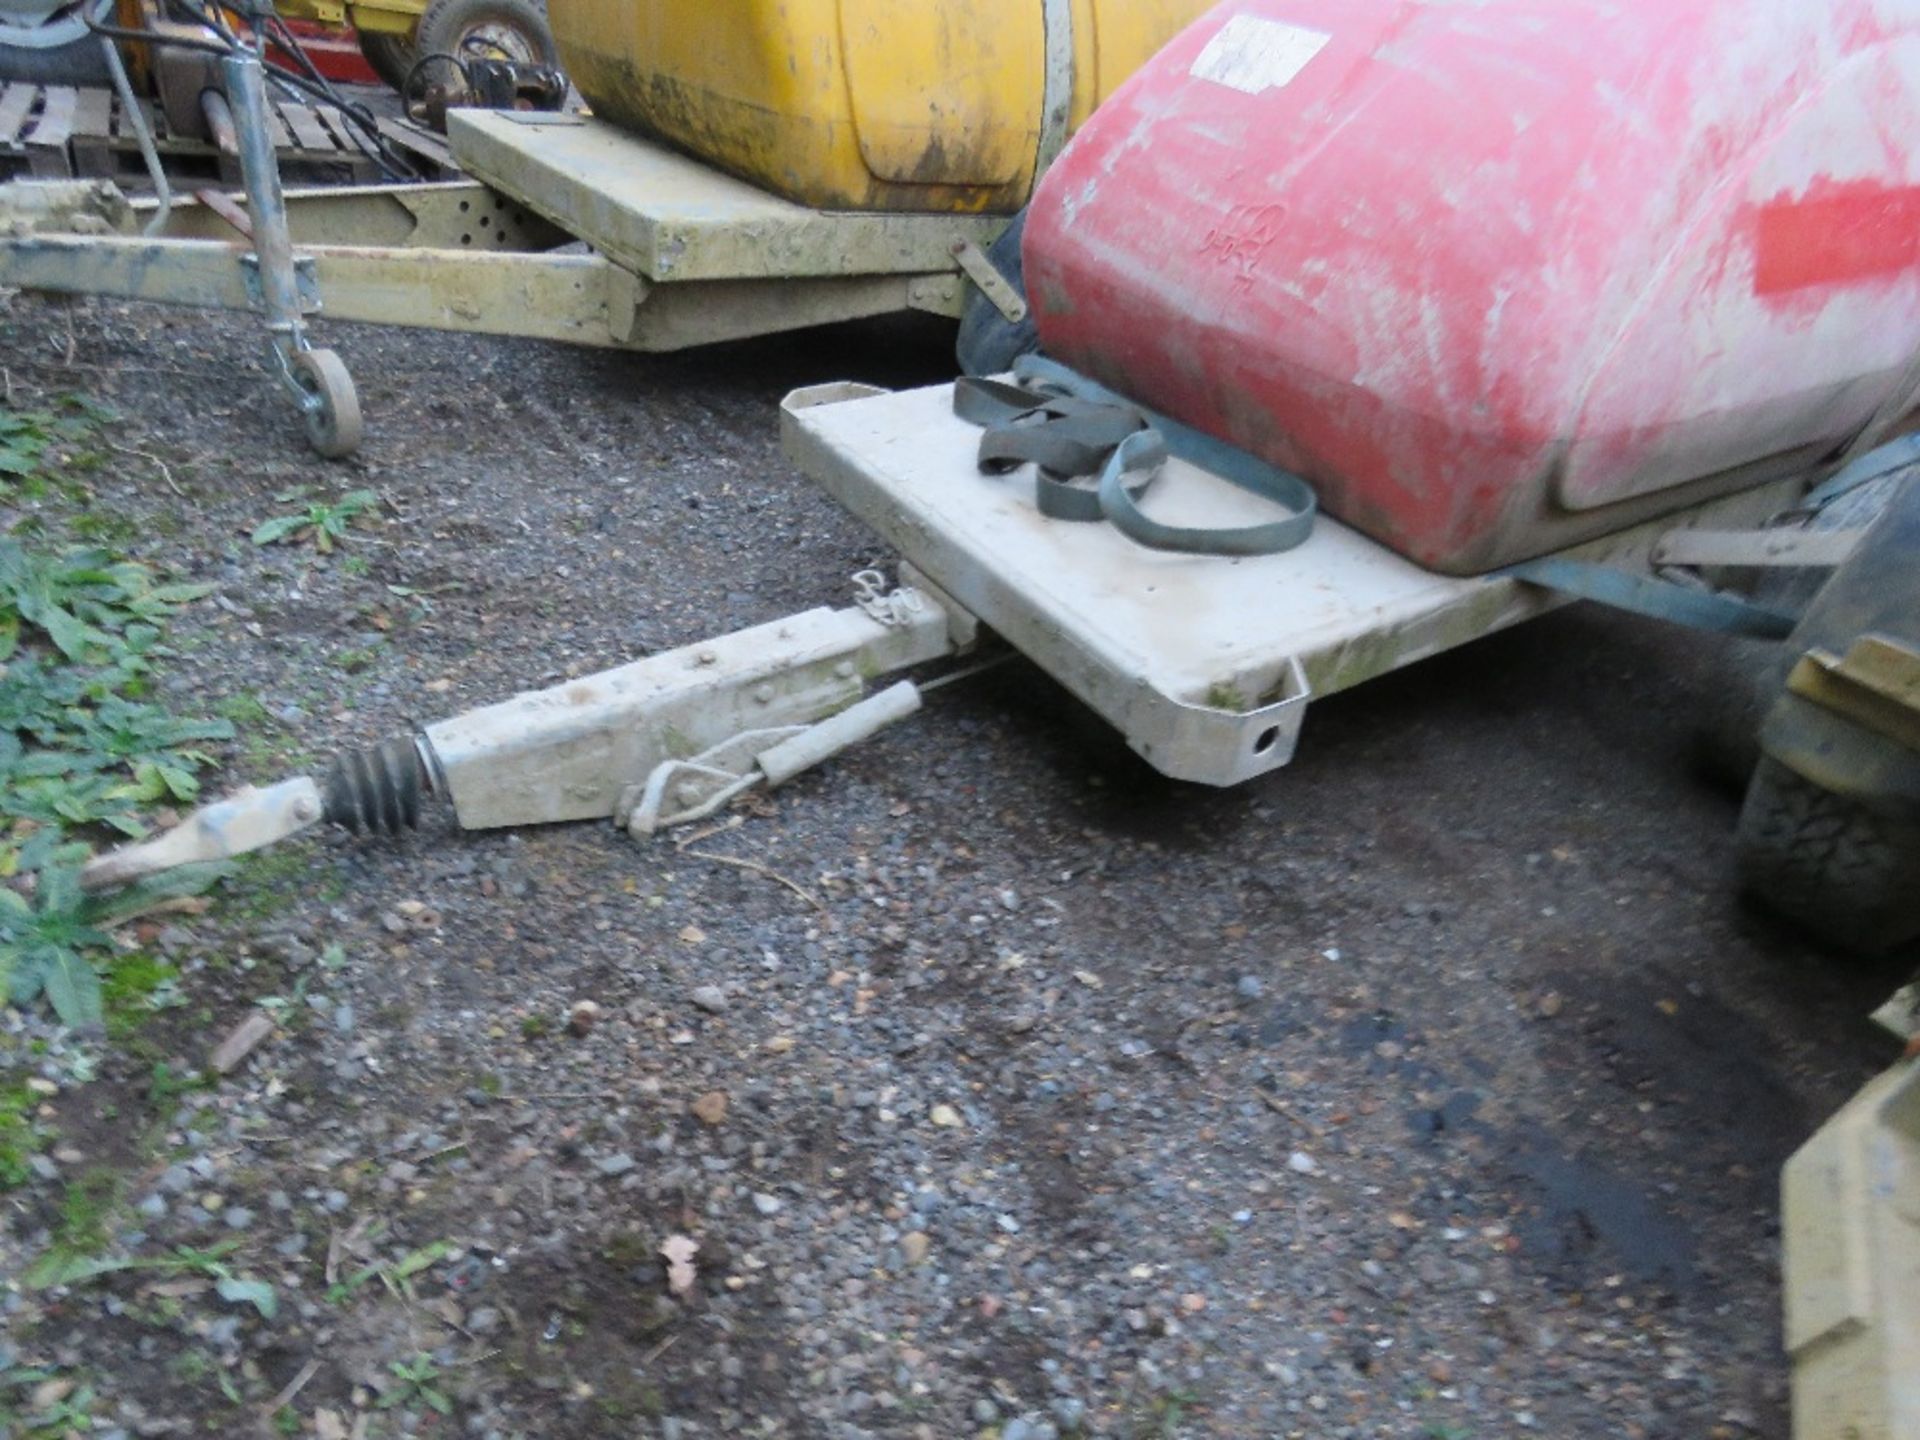 WESTERN SINGLE AXLED WATER BOWSER WITH LONG NECK TO HOUSE PRESSURE WASHER ETC. - Image 5 of 5